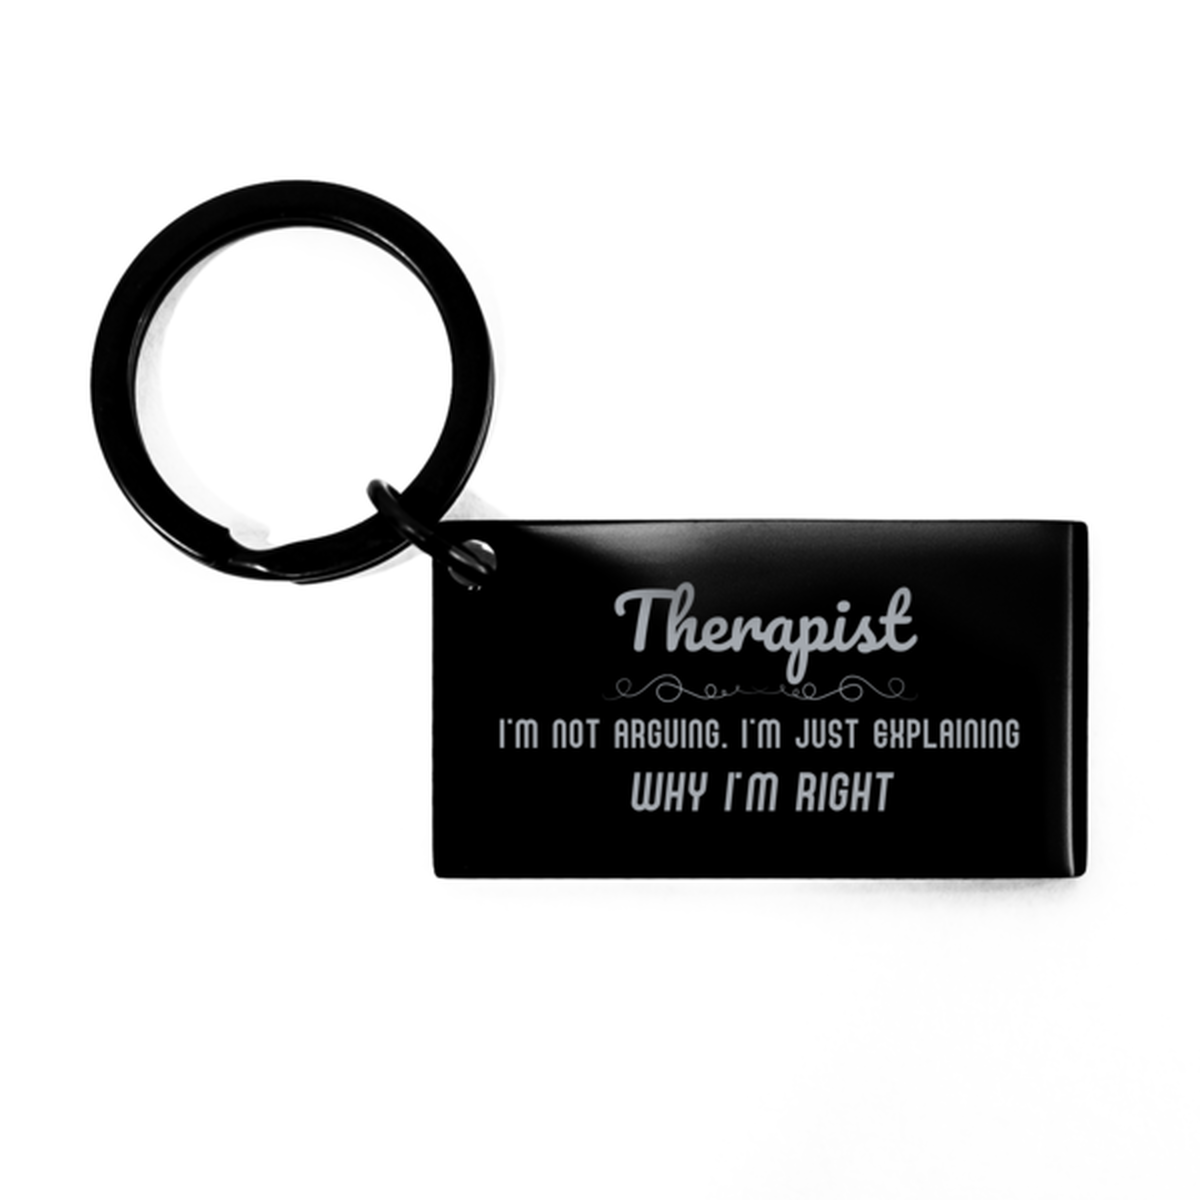 Therapist I'm not Arguing. I'm Just Explaining Why I'm RIGHT Keychain, Funny Saying Quote Therapist Gifts For Therapist Graduation Birthday Christmas Gifts for Men Women Coworker